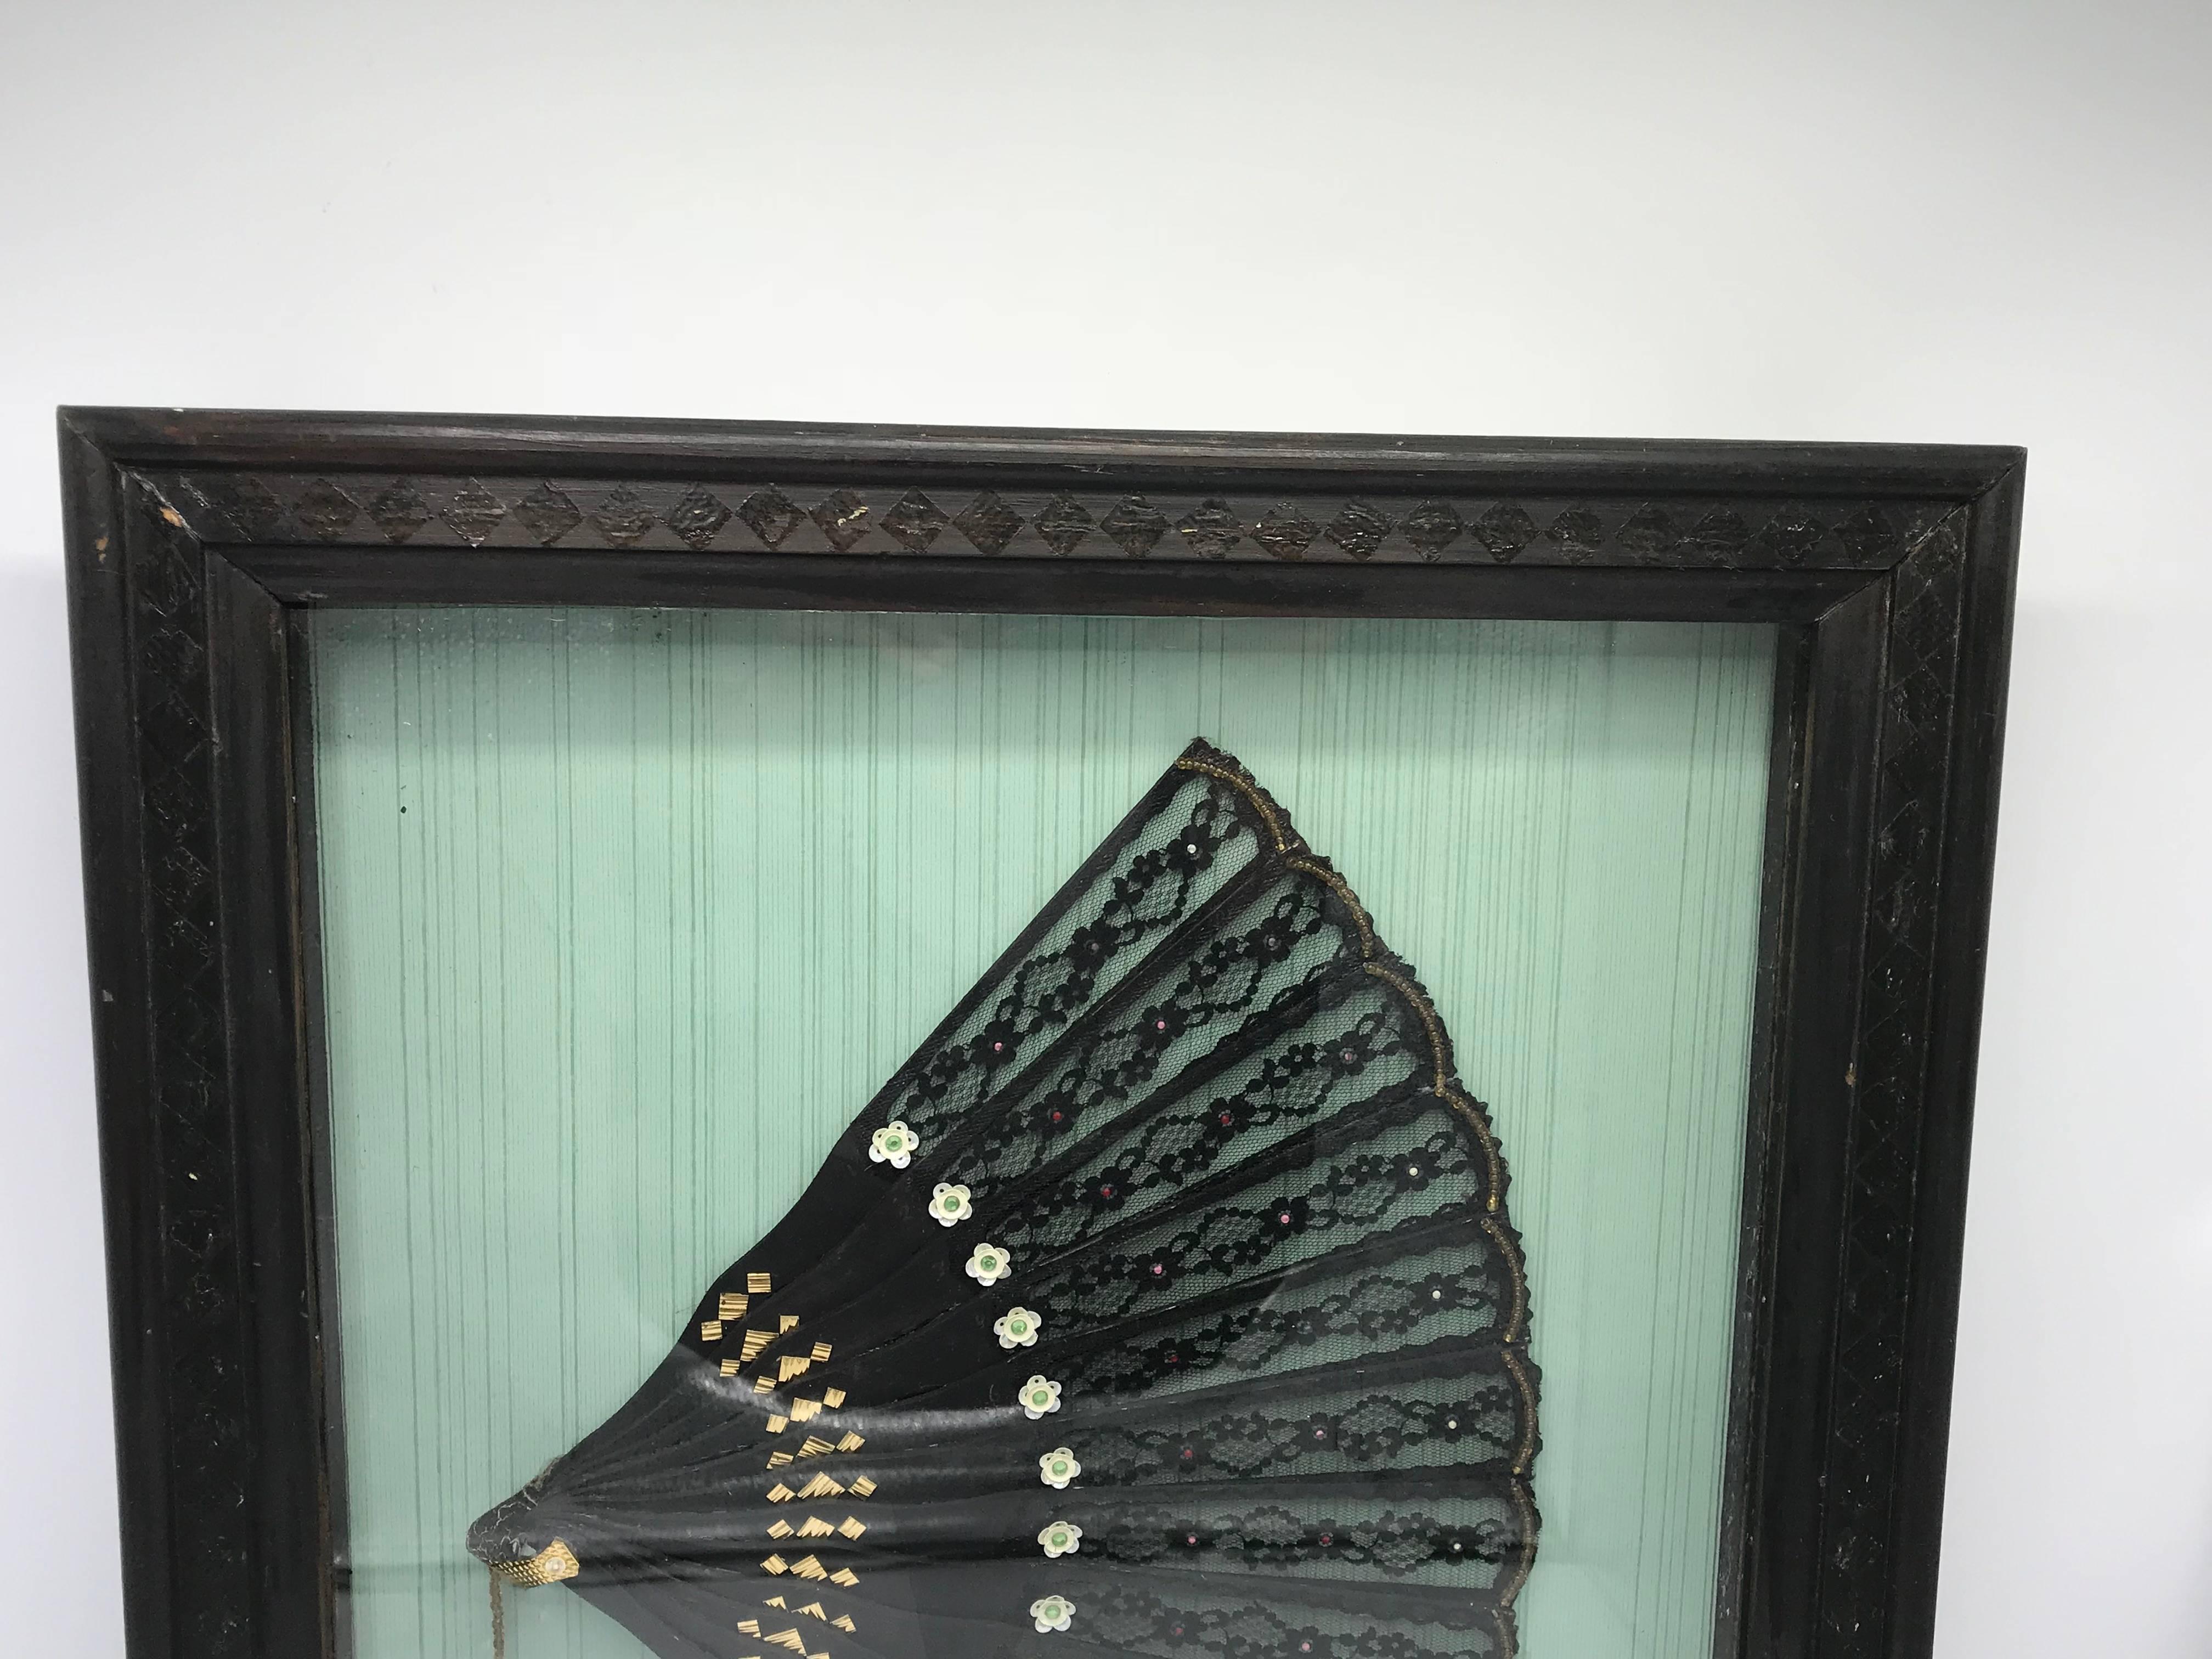 Offered is a gorgeous, 19th century Victorian hand-fan. The piece is black with sequins all-over. Framed in a shadow box.